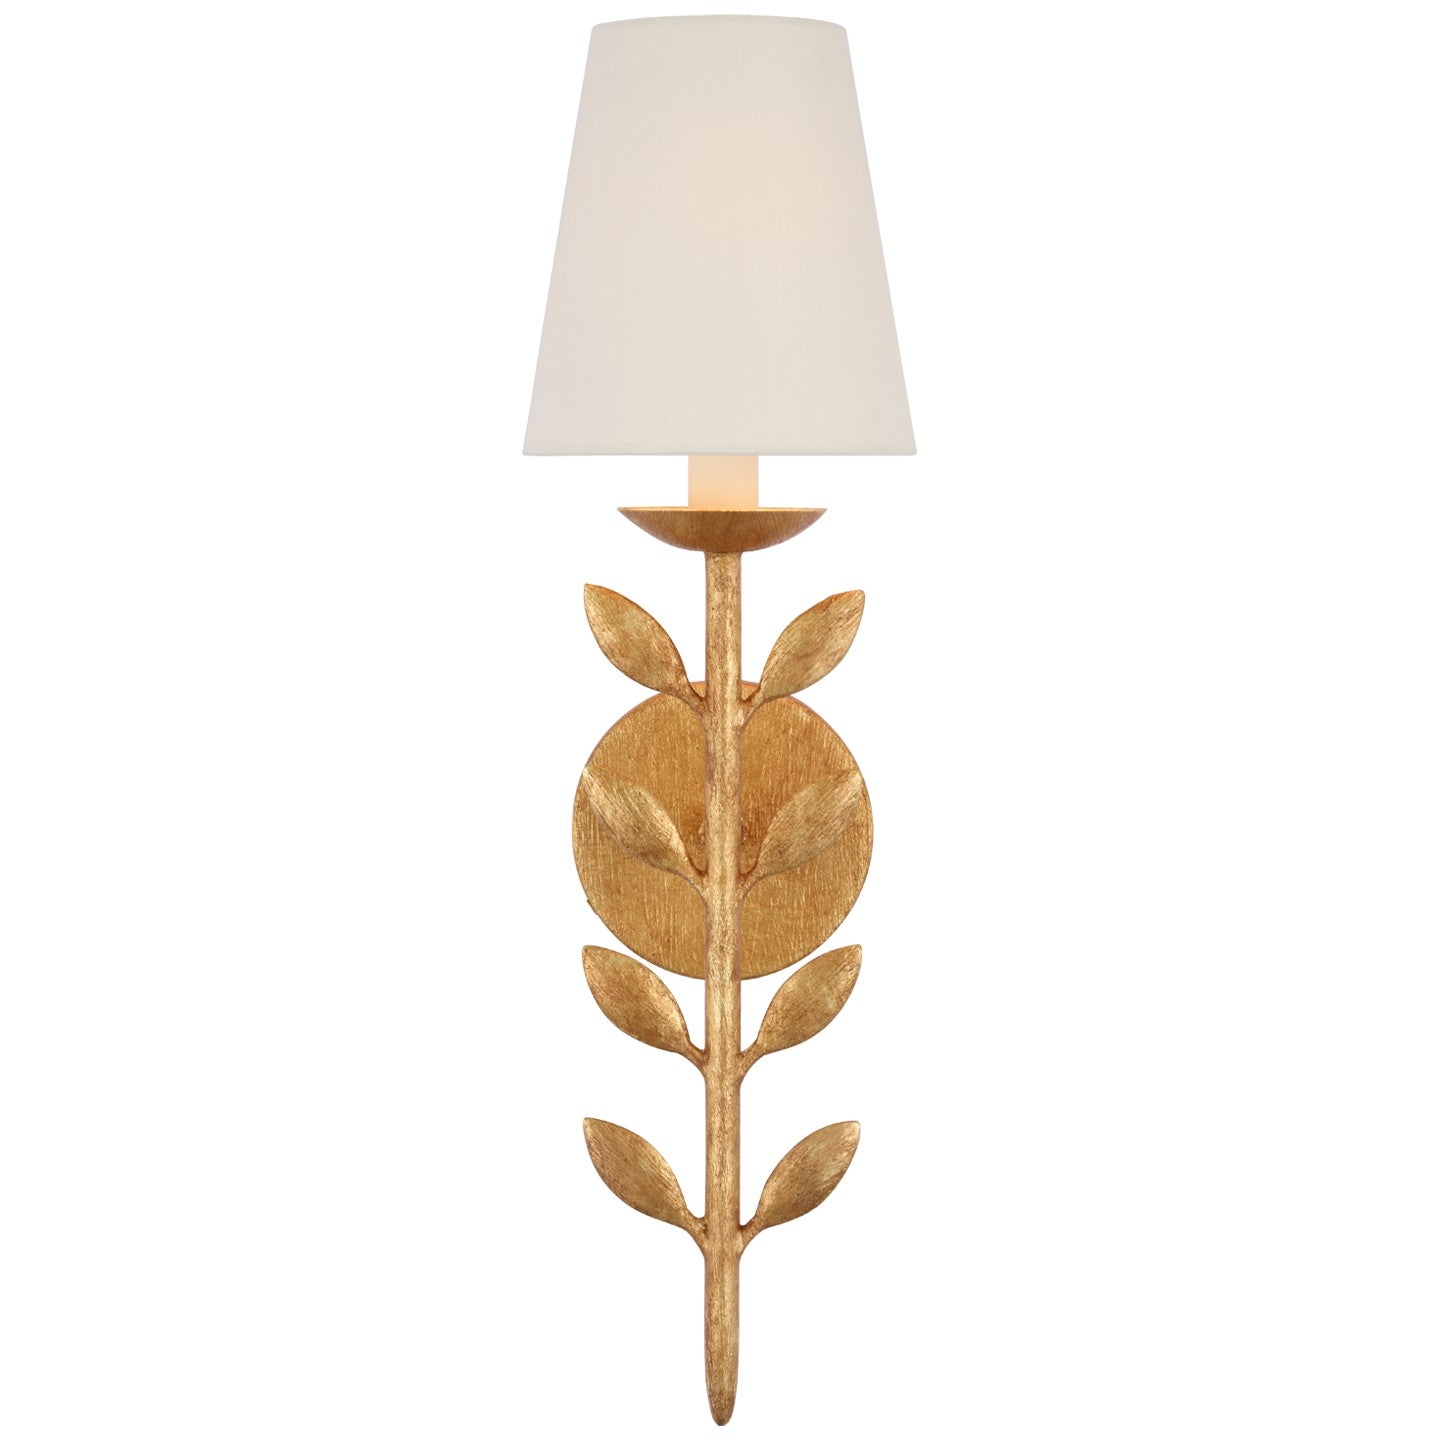 Visual Comfort Signature - JN 2086AGL-L - LED Wall Sconce - Avery - Antique Gold Leaf